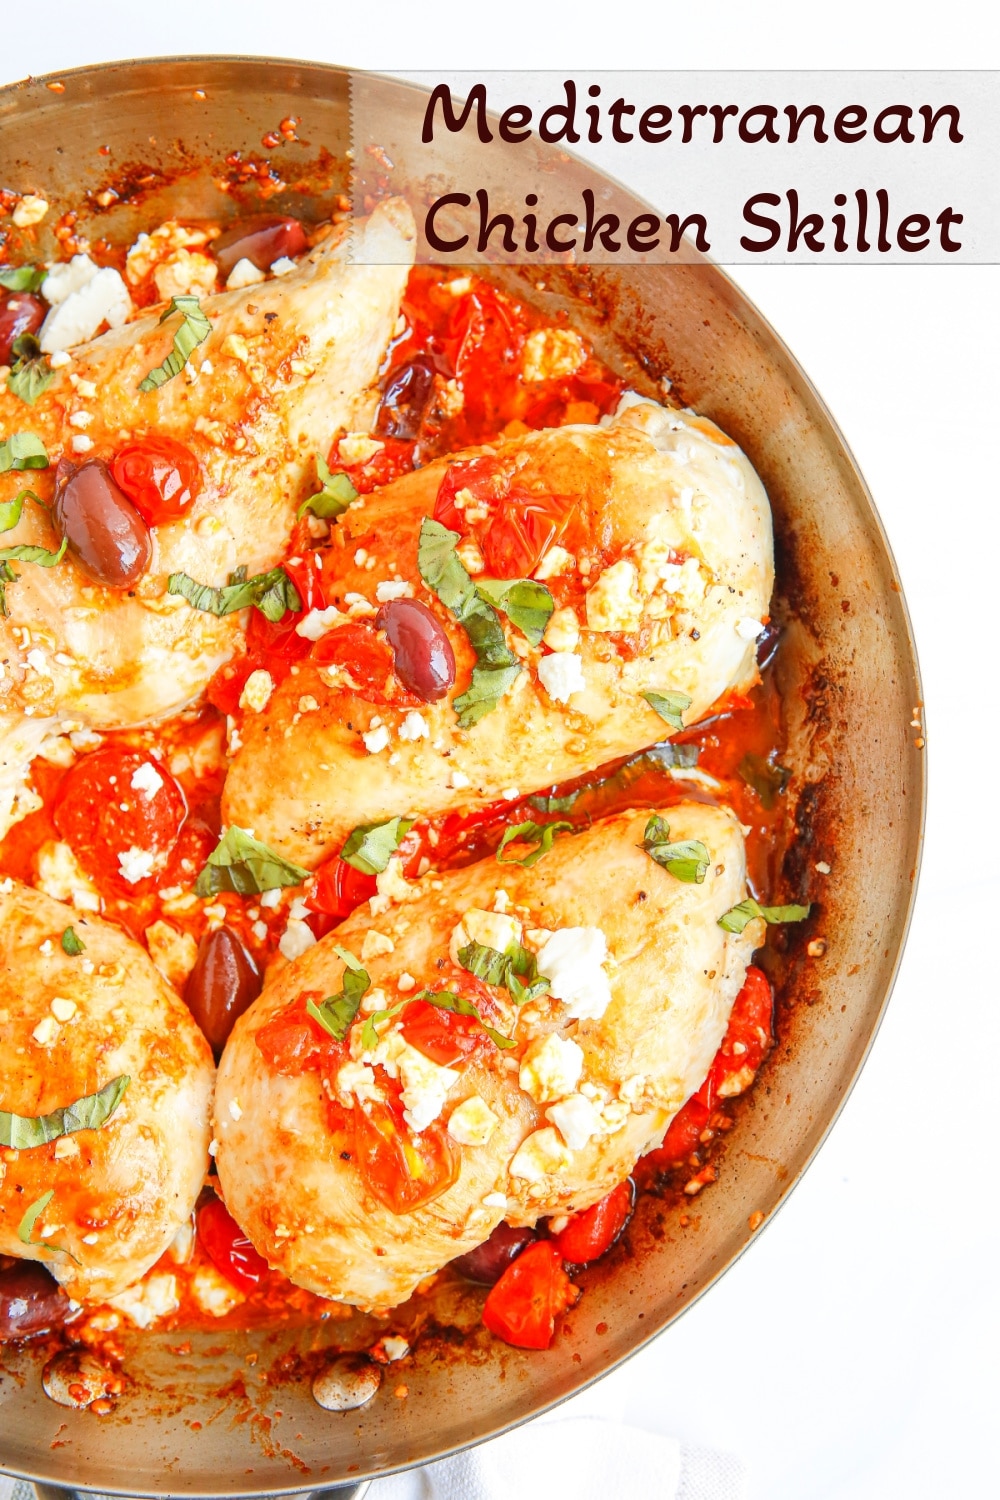 Juicy chicken breasts meet a fresh tomato-rich sauce in this Mediterranean one-skillet dish. This six-ingredient version is on the table in just thirty minutes, meaning you can dig into it any night of the week. via @cmpollak1